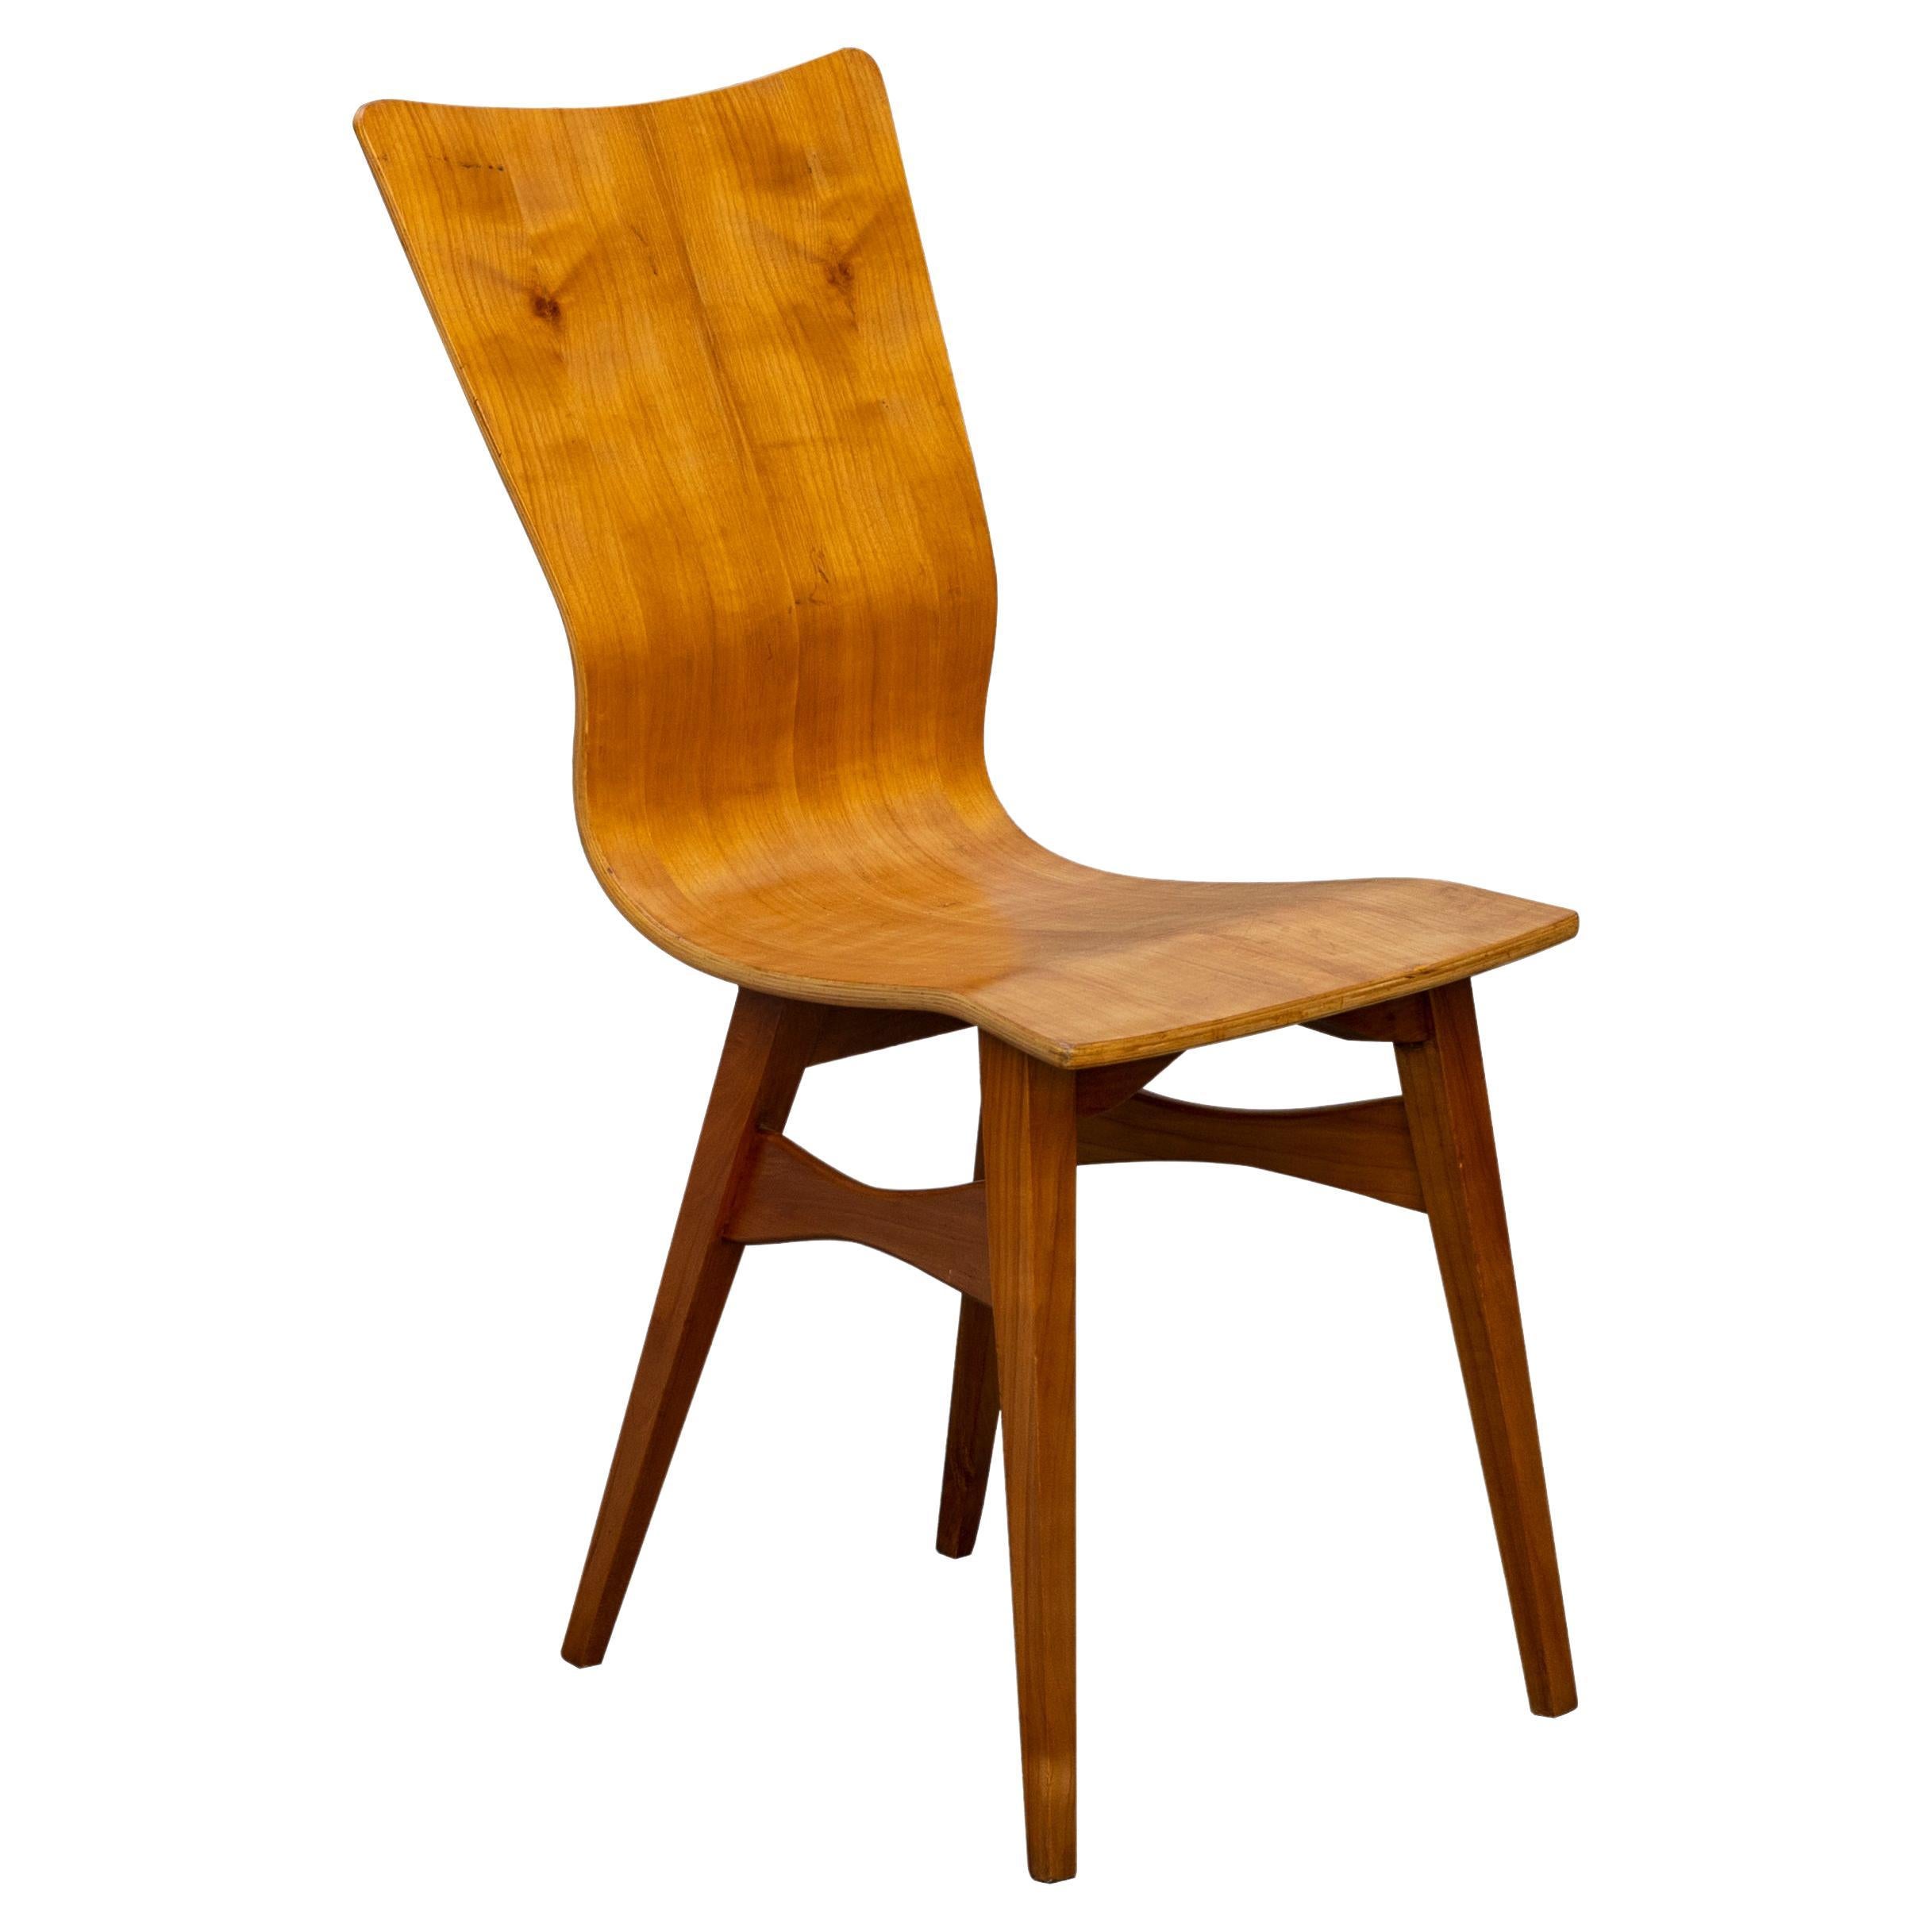 3 Chairs in the  Curved Wood .   Marked under the seat ,  by Fratelli Lippi , Italian design work from the mid-1950s. Original and documented. These 3 chairs have a fantastic deisg are interesting for the curved wooden seat , and for the laring of